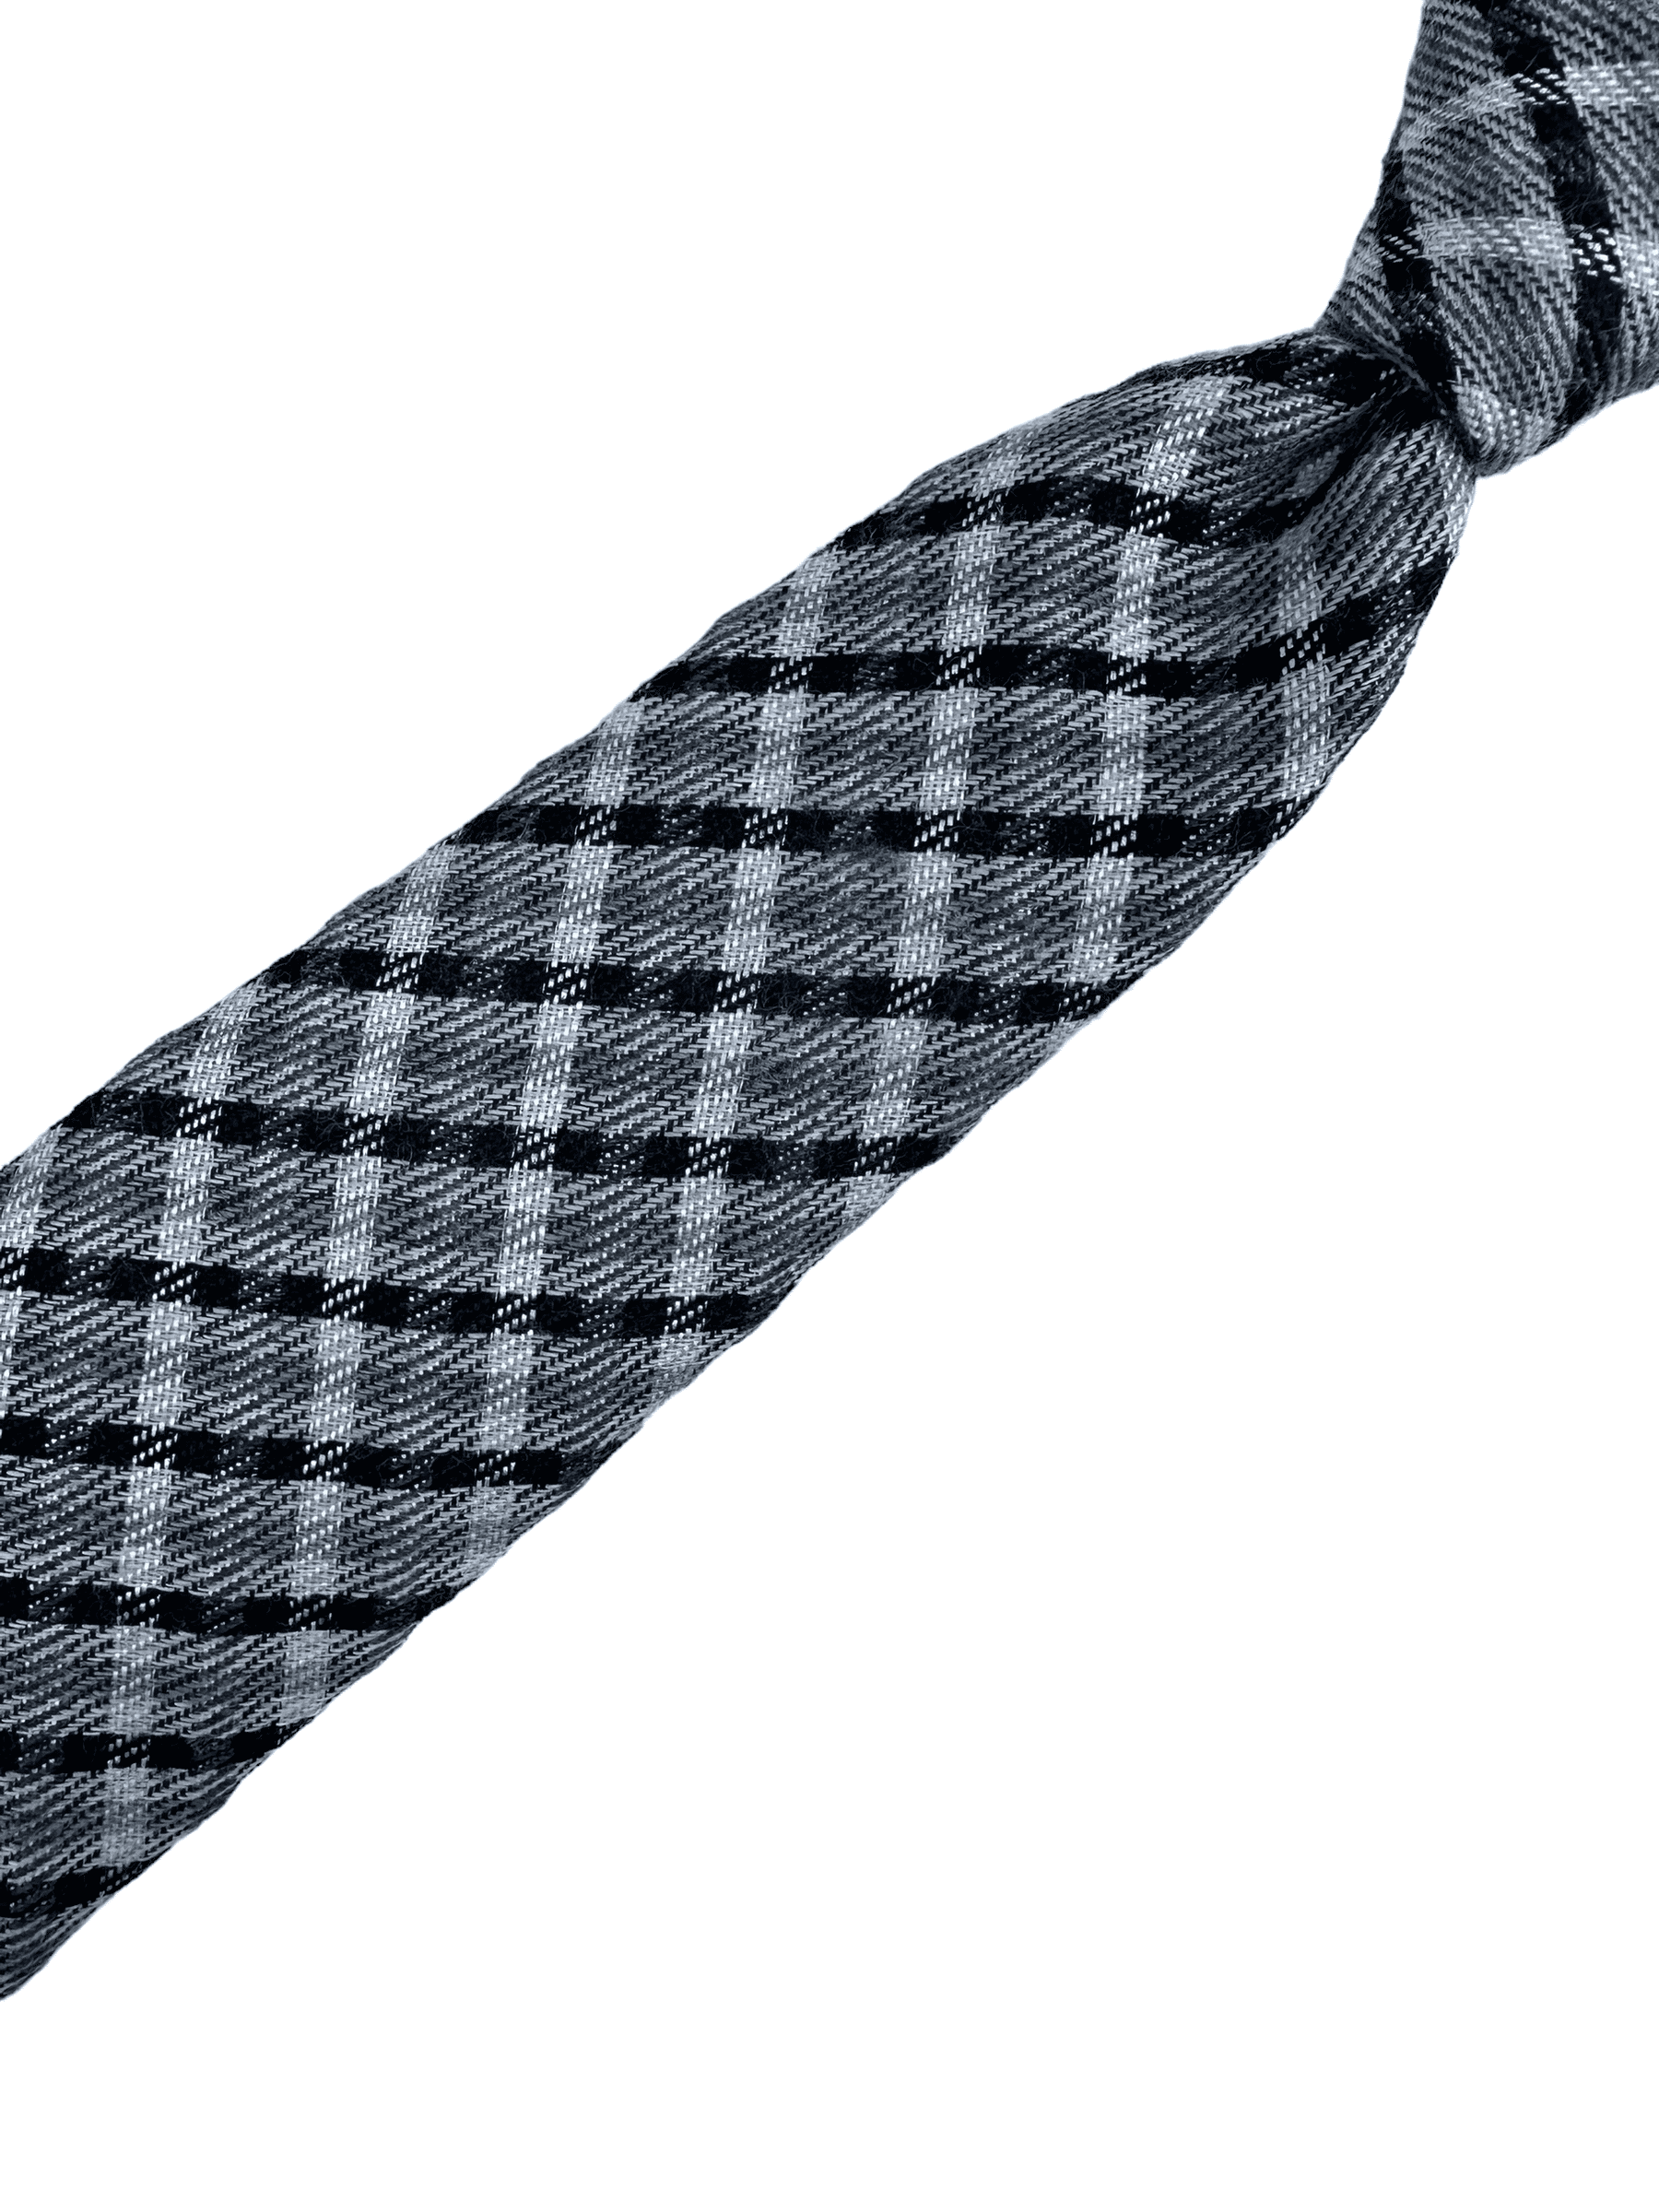 Tom Ford Black Plaid Wool Tie - Genuine Design luxury consignment Calgary, Alberta, Canada New & pre-owned clothing, shoes, accessories.